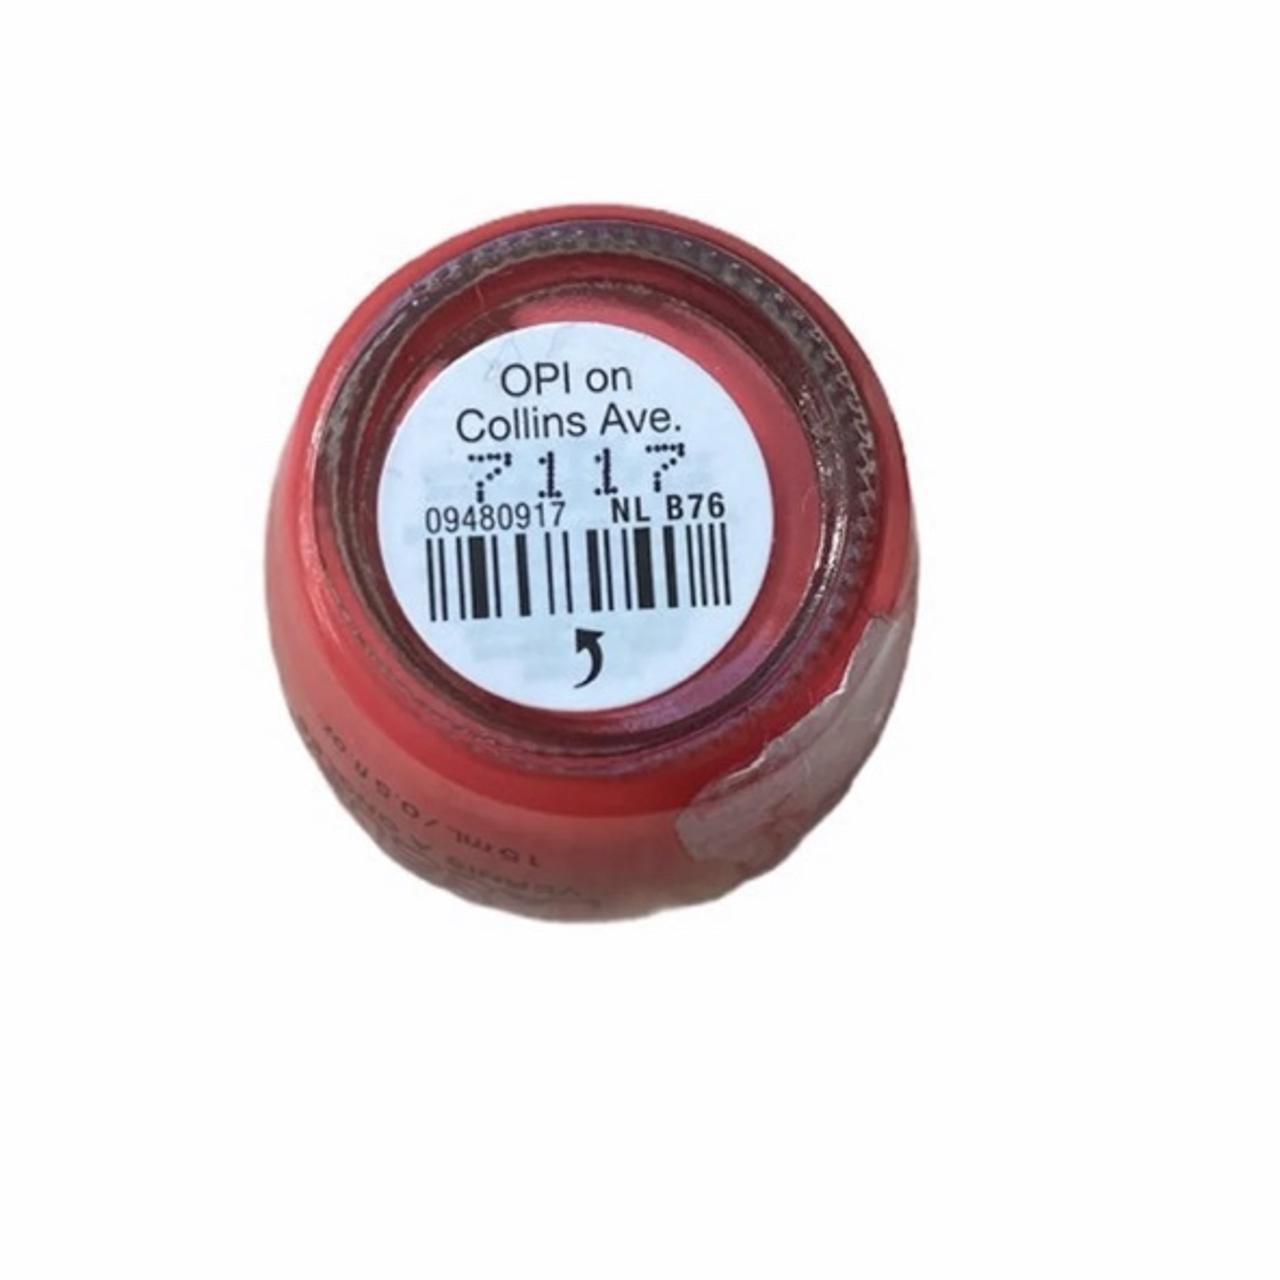 Product Image 3 - OPI "on Collins Ave" Nail